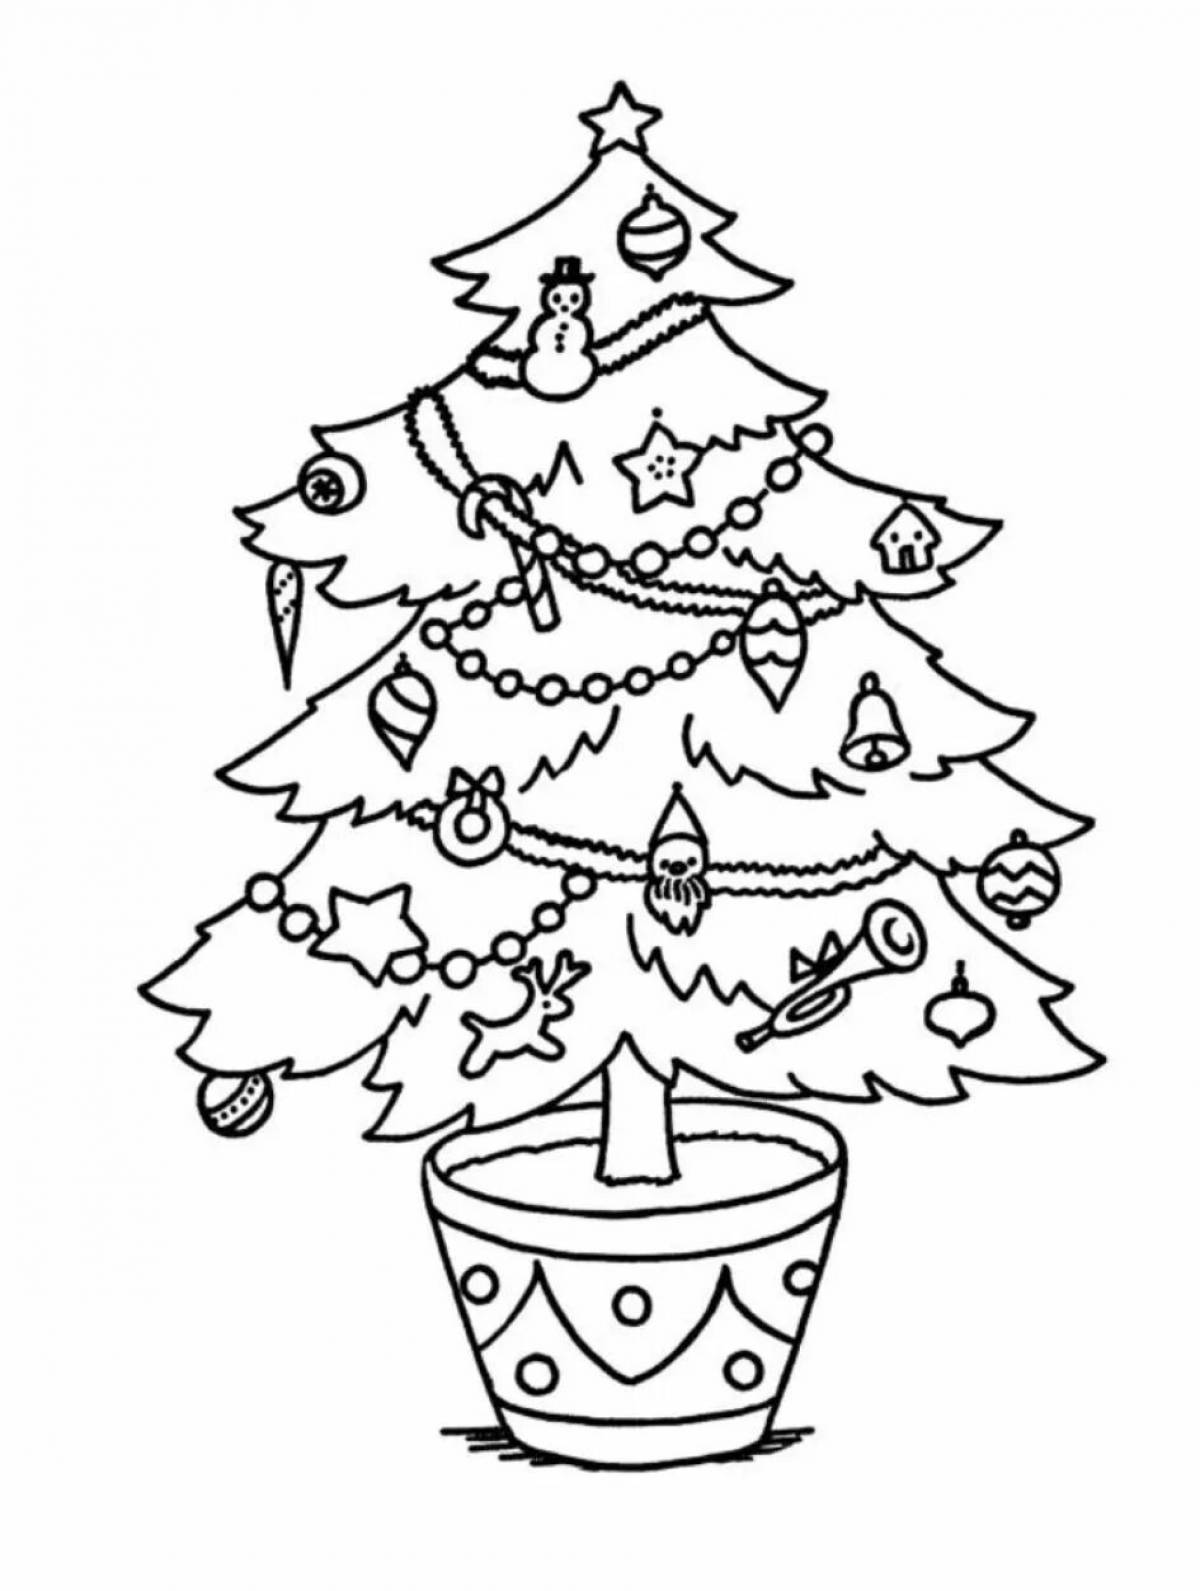 Christmas tree picture for kids #6